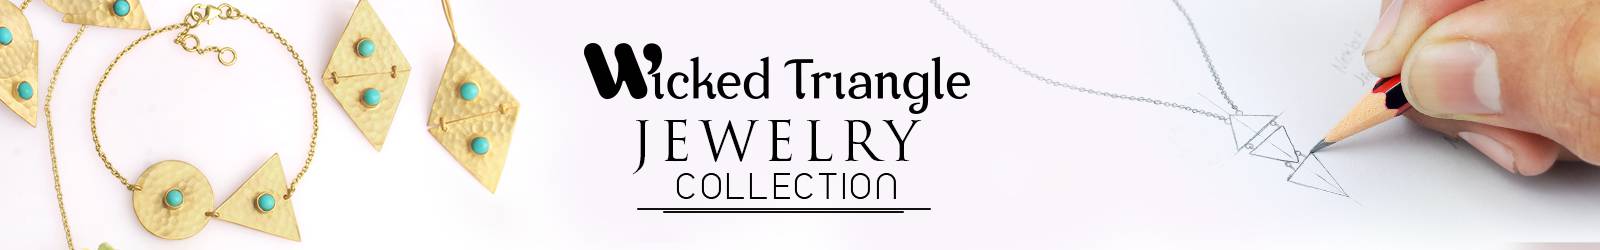 Wicked Triangle Jewelry Collection